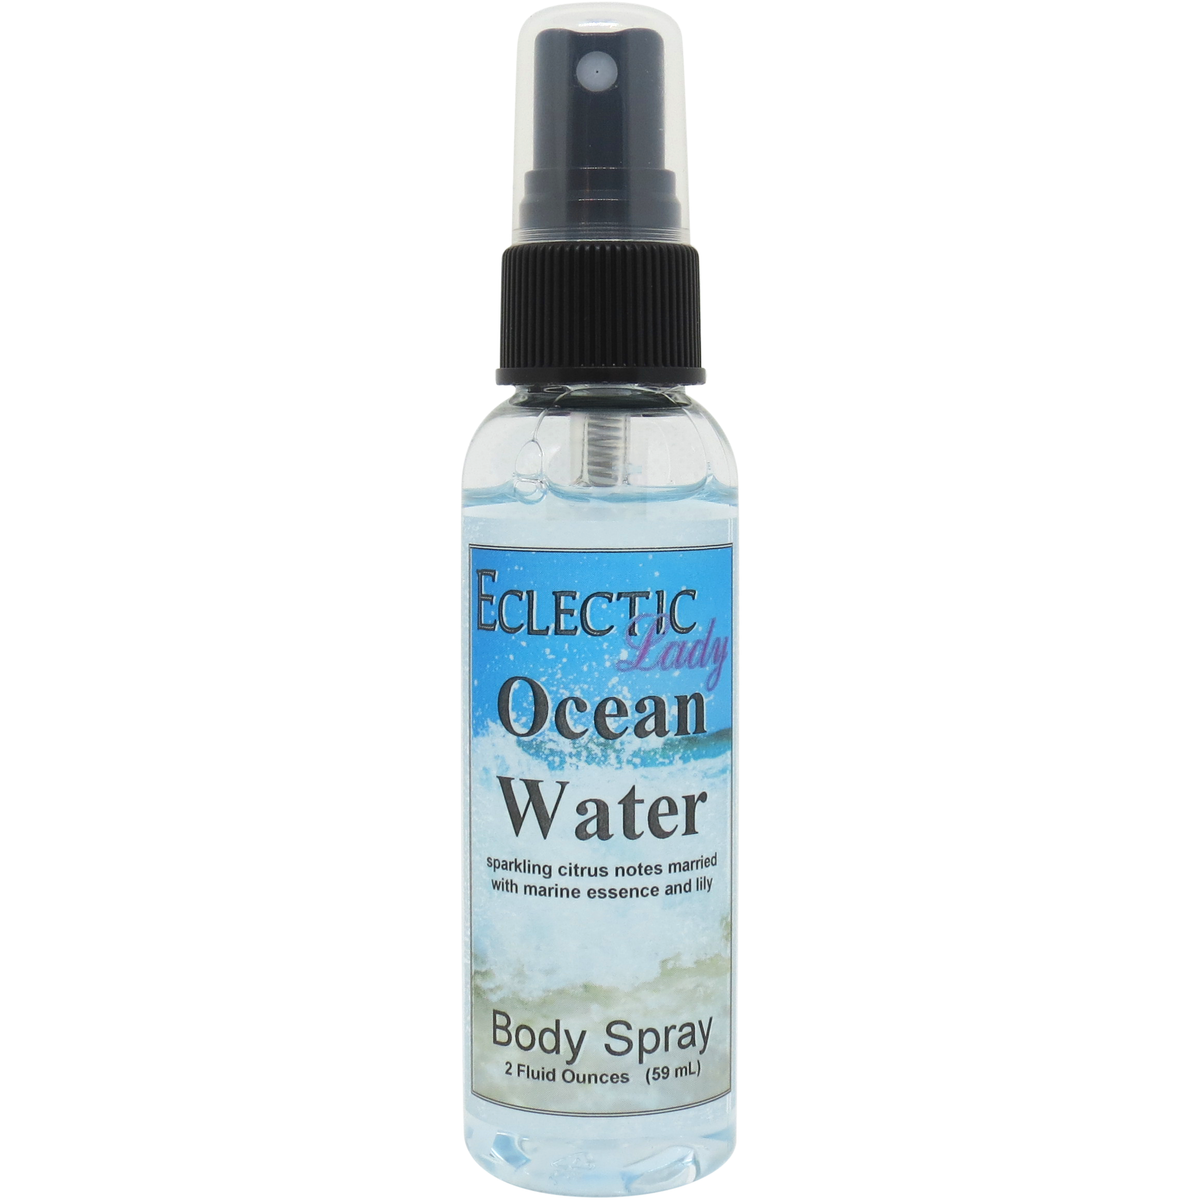 Ocean Water Body Spray, Hydrating Body Mist for Daily Use